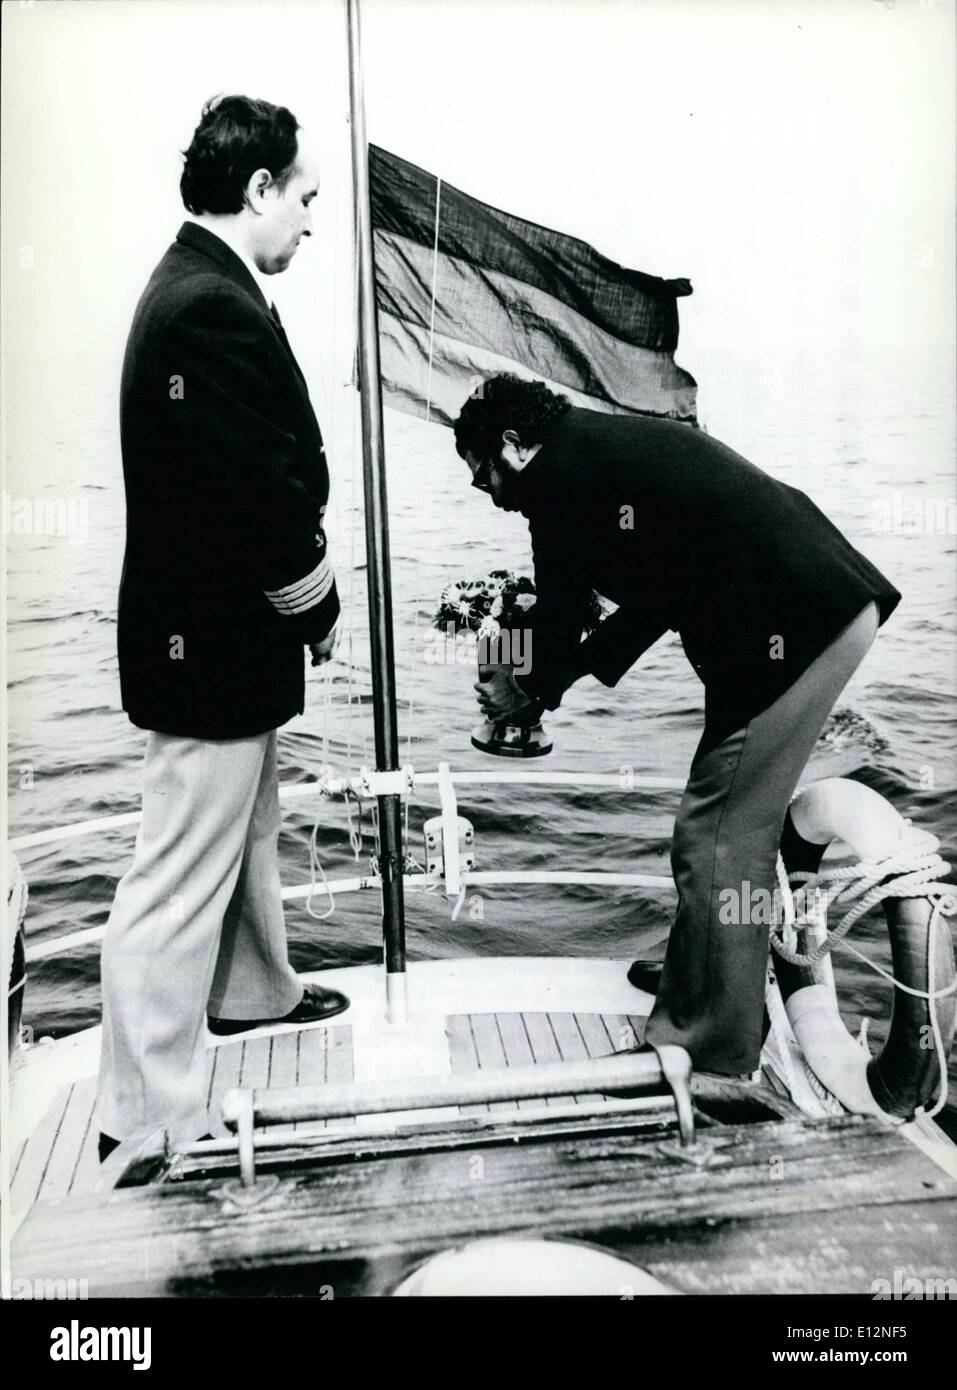 Feb. 24, 2012 - First German sea undertaker's proves to be successful: The ashes of a person, who had wished to be buried at sea are seen being lowered into the water by a co-worker of the first ''German Shipping-Firm for Sea Burials''(picture). Being one year in business now, the firm has proved to be rather successful many urns have already been sent to the bottom of the Nort or Baltic Sea and about one thousand people have declared to be buried at sea after they will have died Stock Photo